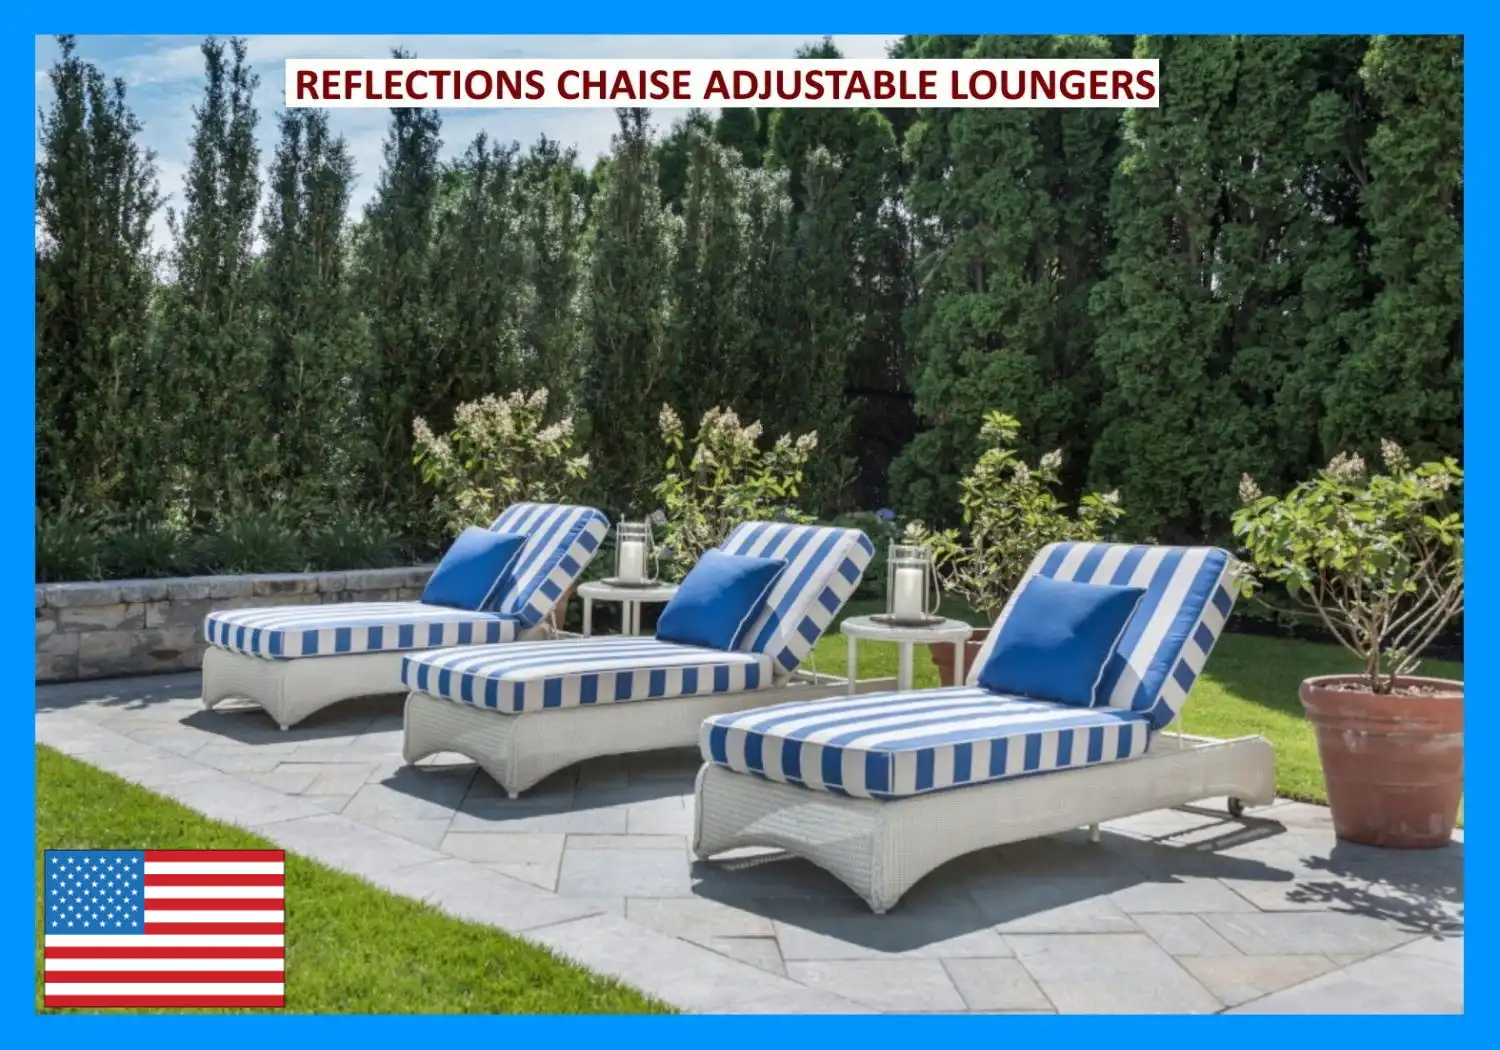 REFLECTIONS CHAISE ADJUSTABLE LOUNGERS